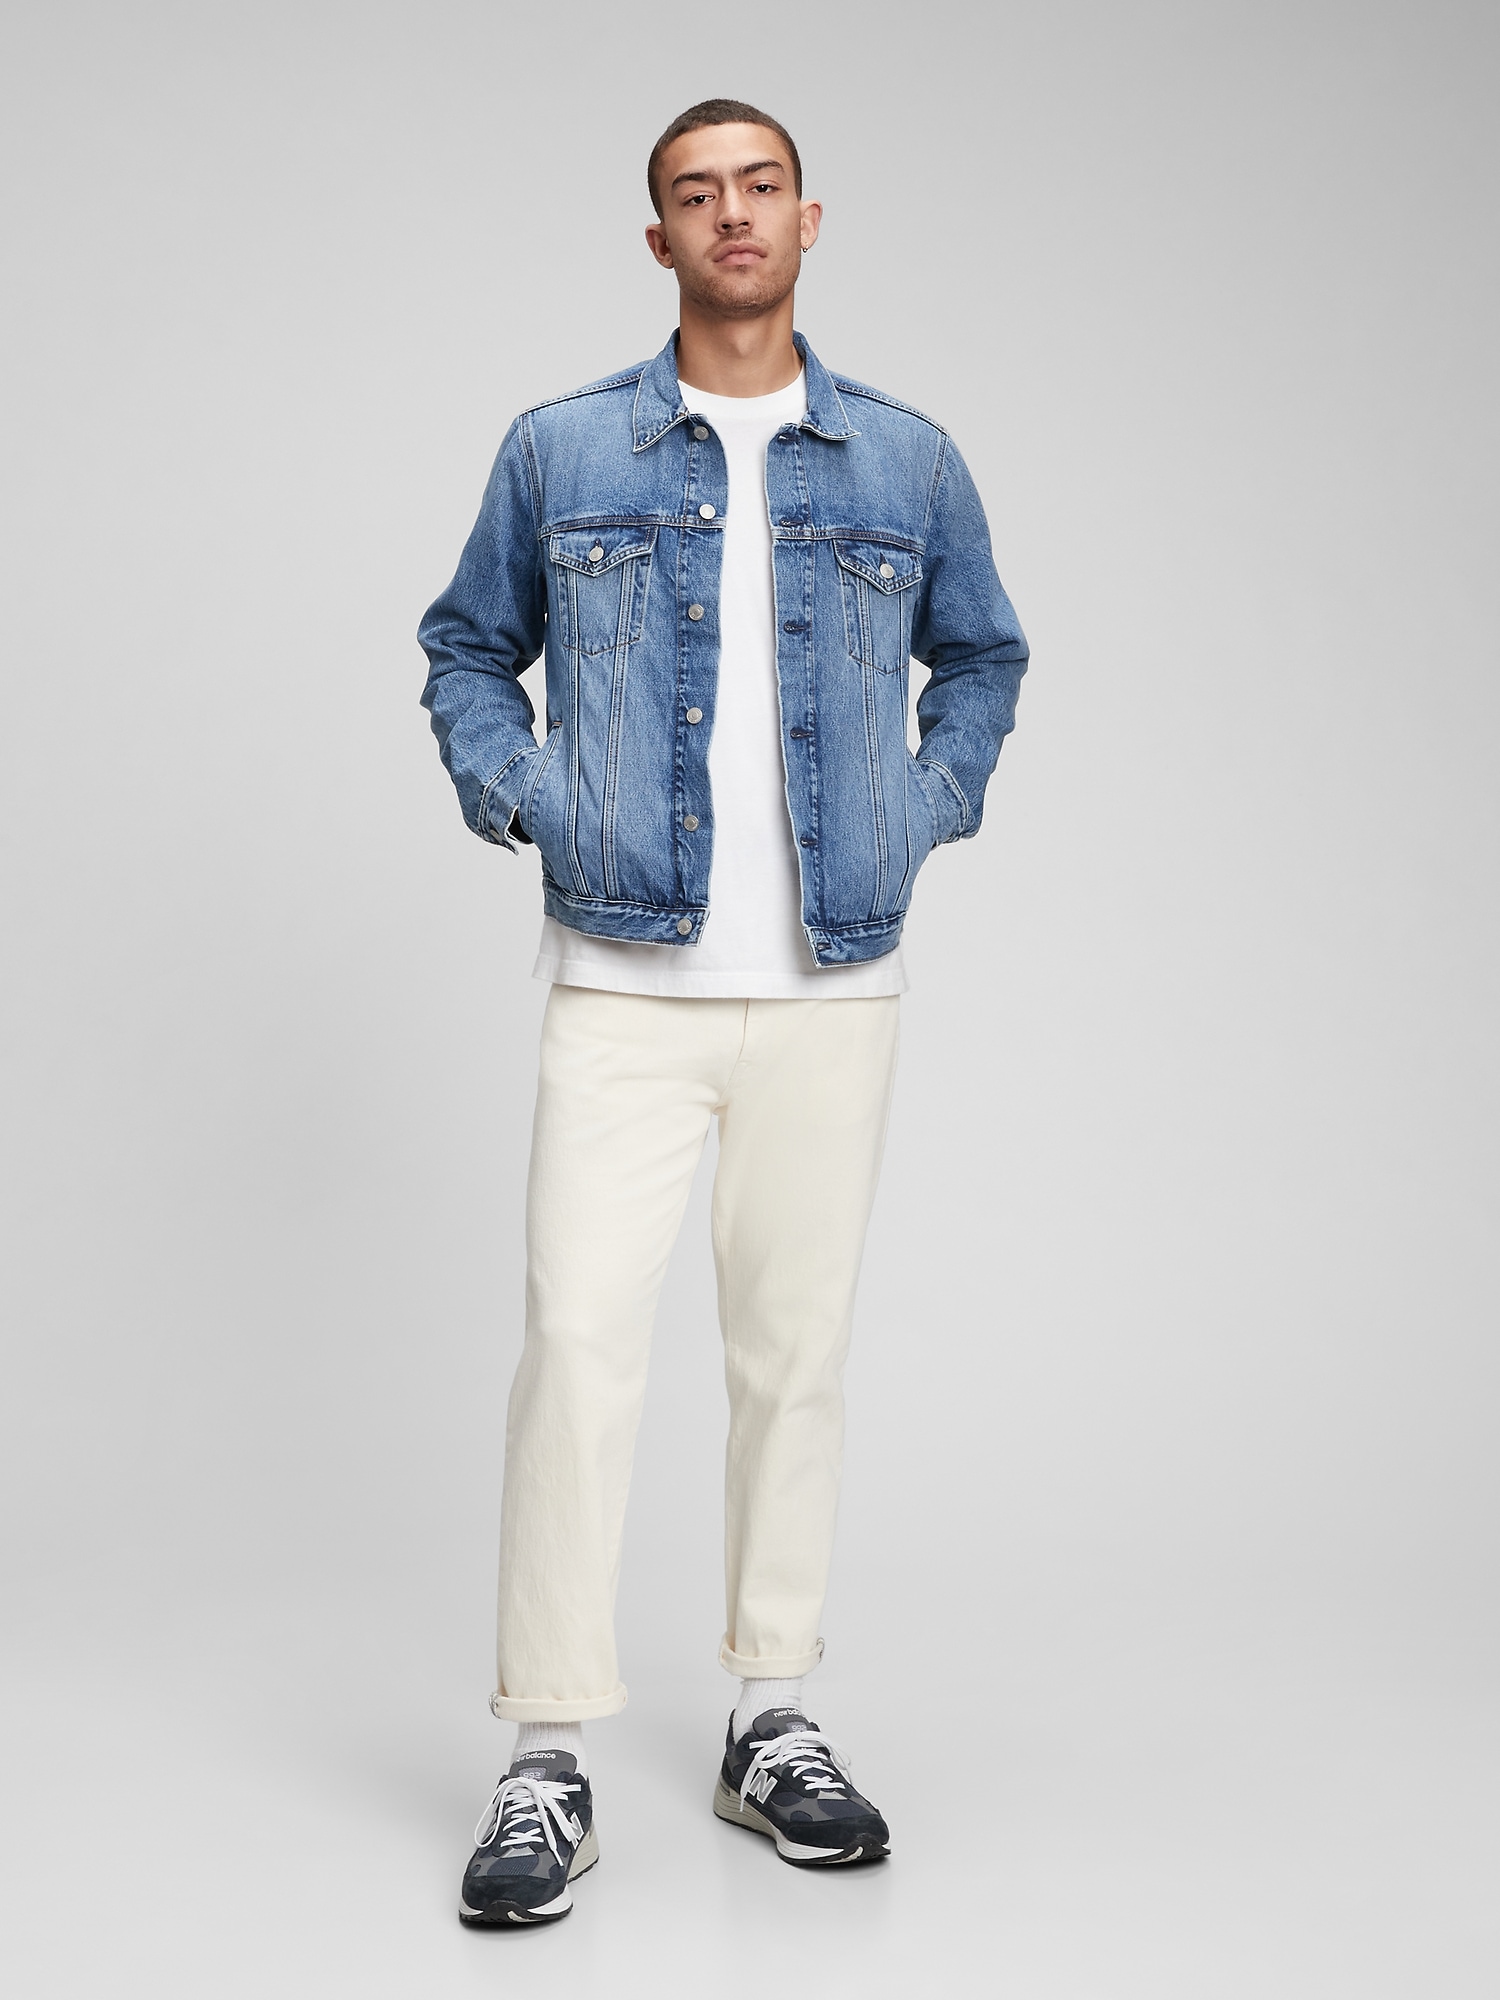 Jean Jacket Outfits for Men: Master Denim Style